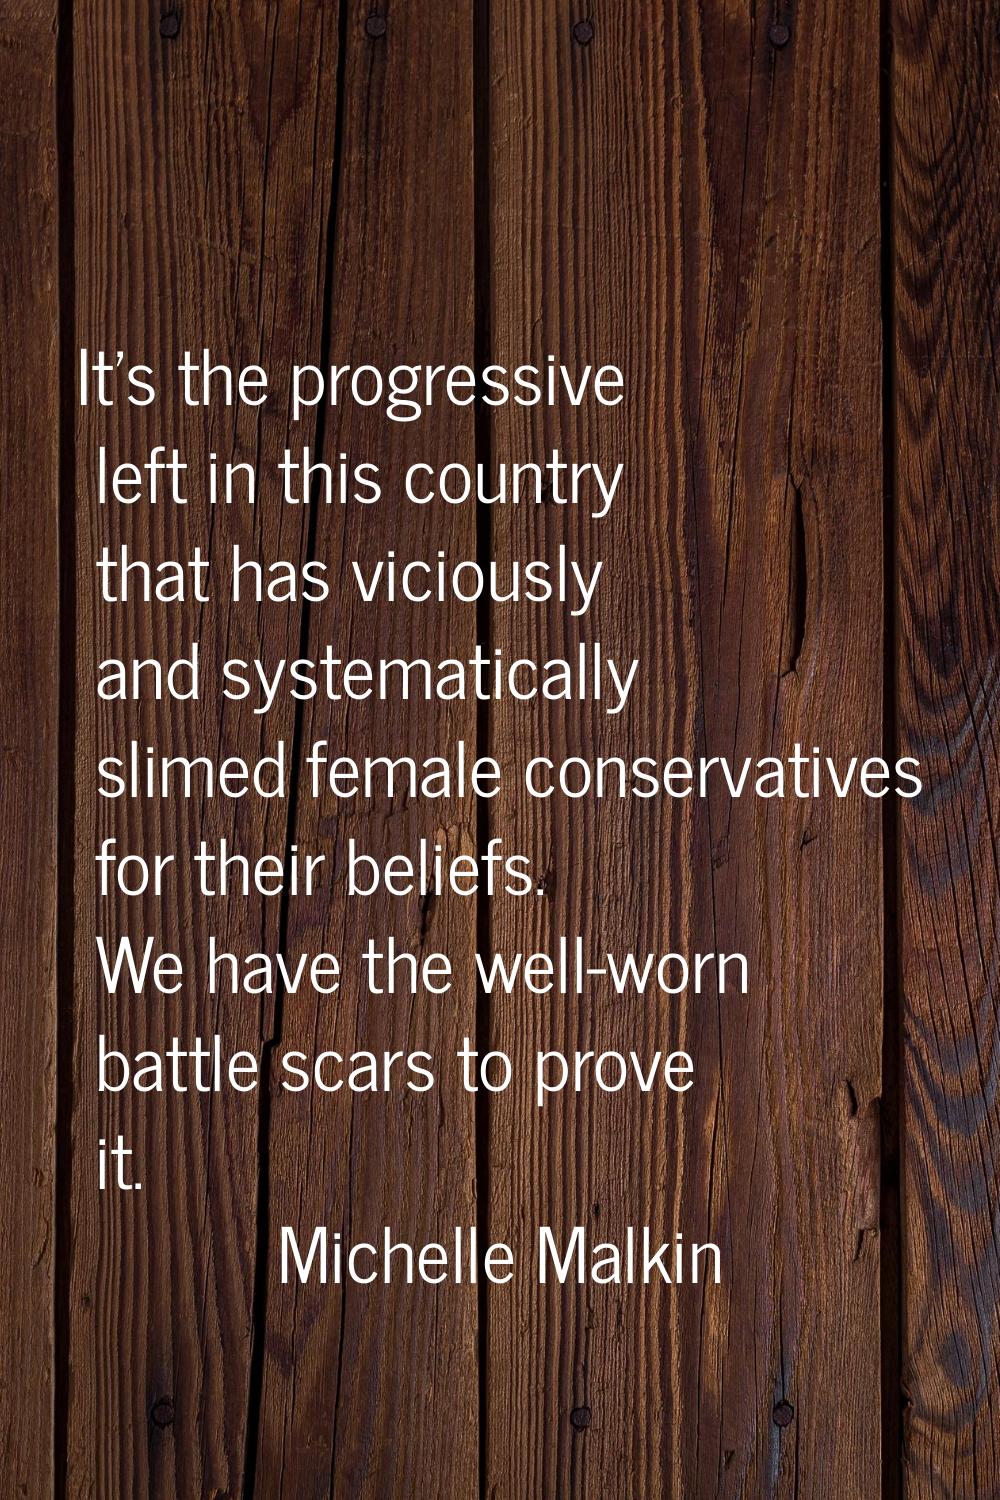 It's the progressive left in this country that has viciously and systematically slimed female conse